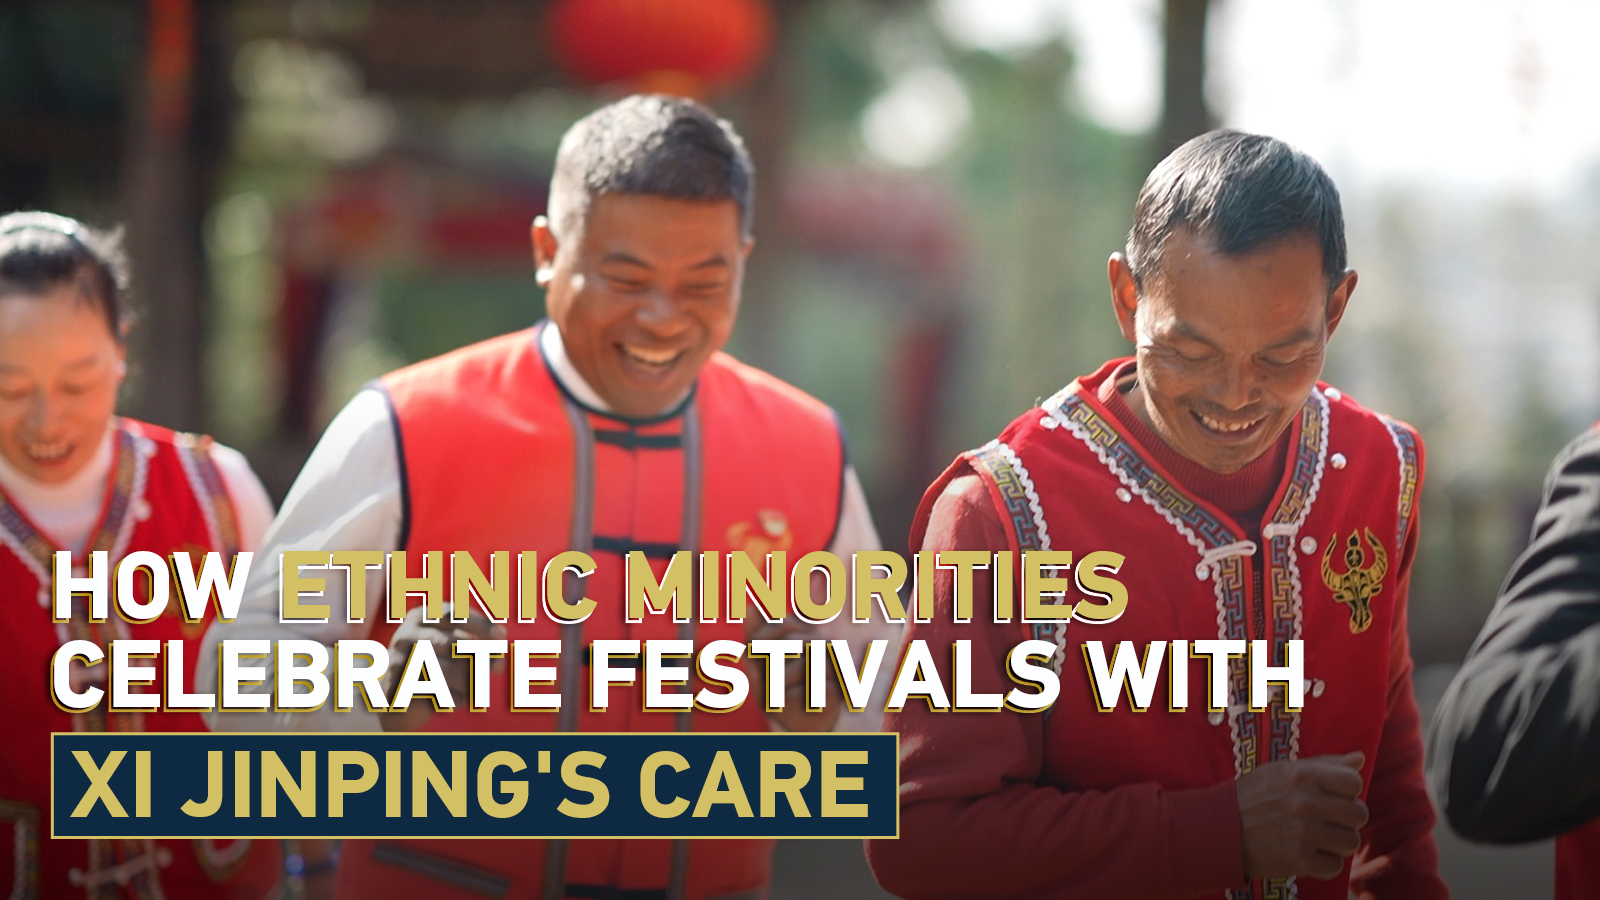 How ethnic minorities celebrate festivals with Xi Jinping's care